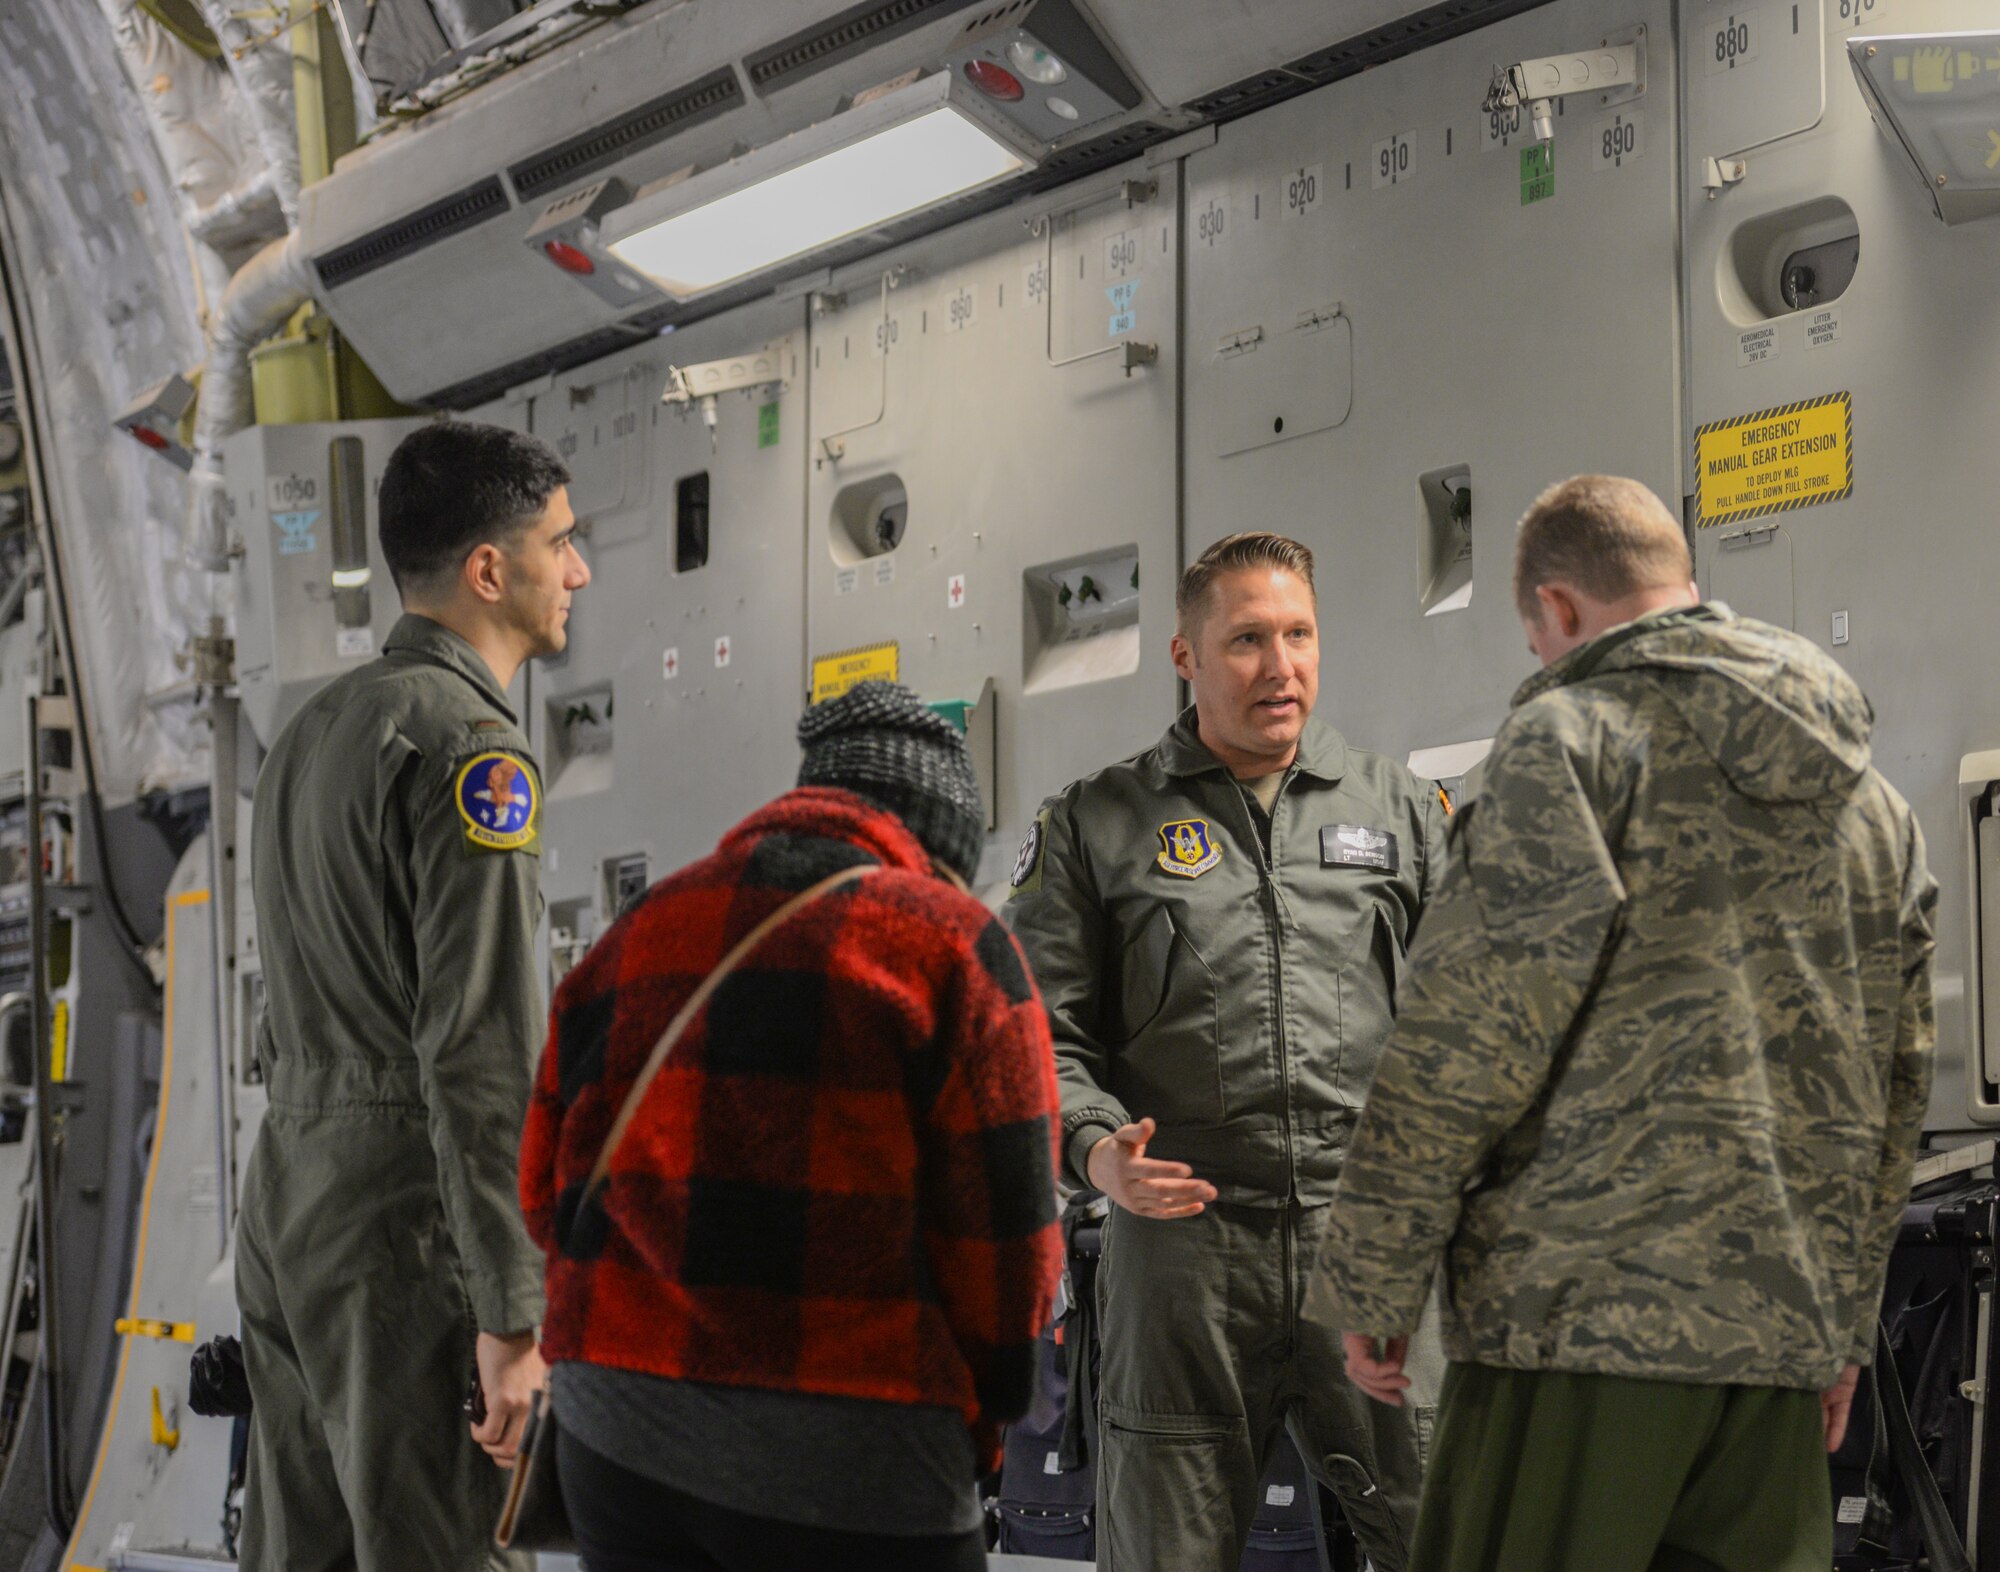 Airmen talk with a member of the aircrew of a C-17 Globemaster III Dec. 10, 2019, at Columbus Air Force Base, Miss. The aircraft is operated by a crew of three Airmen (pilot, co-pilot and loadmaster), reducing manpower requirements, risk exposure and long-term operating costs. (U.S. Air Force photo by Airman Davis Donaldson)